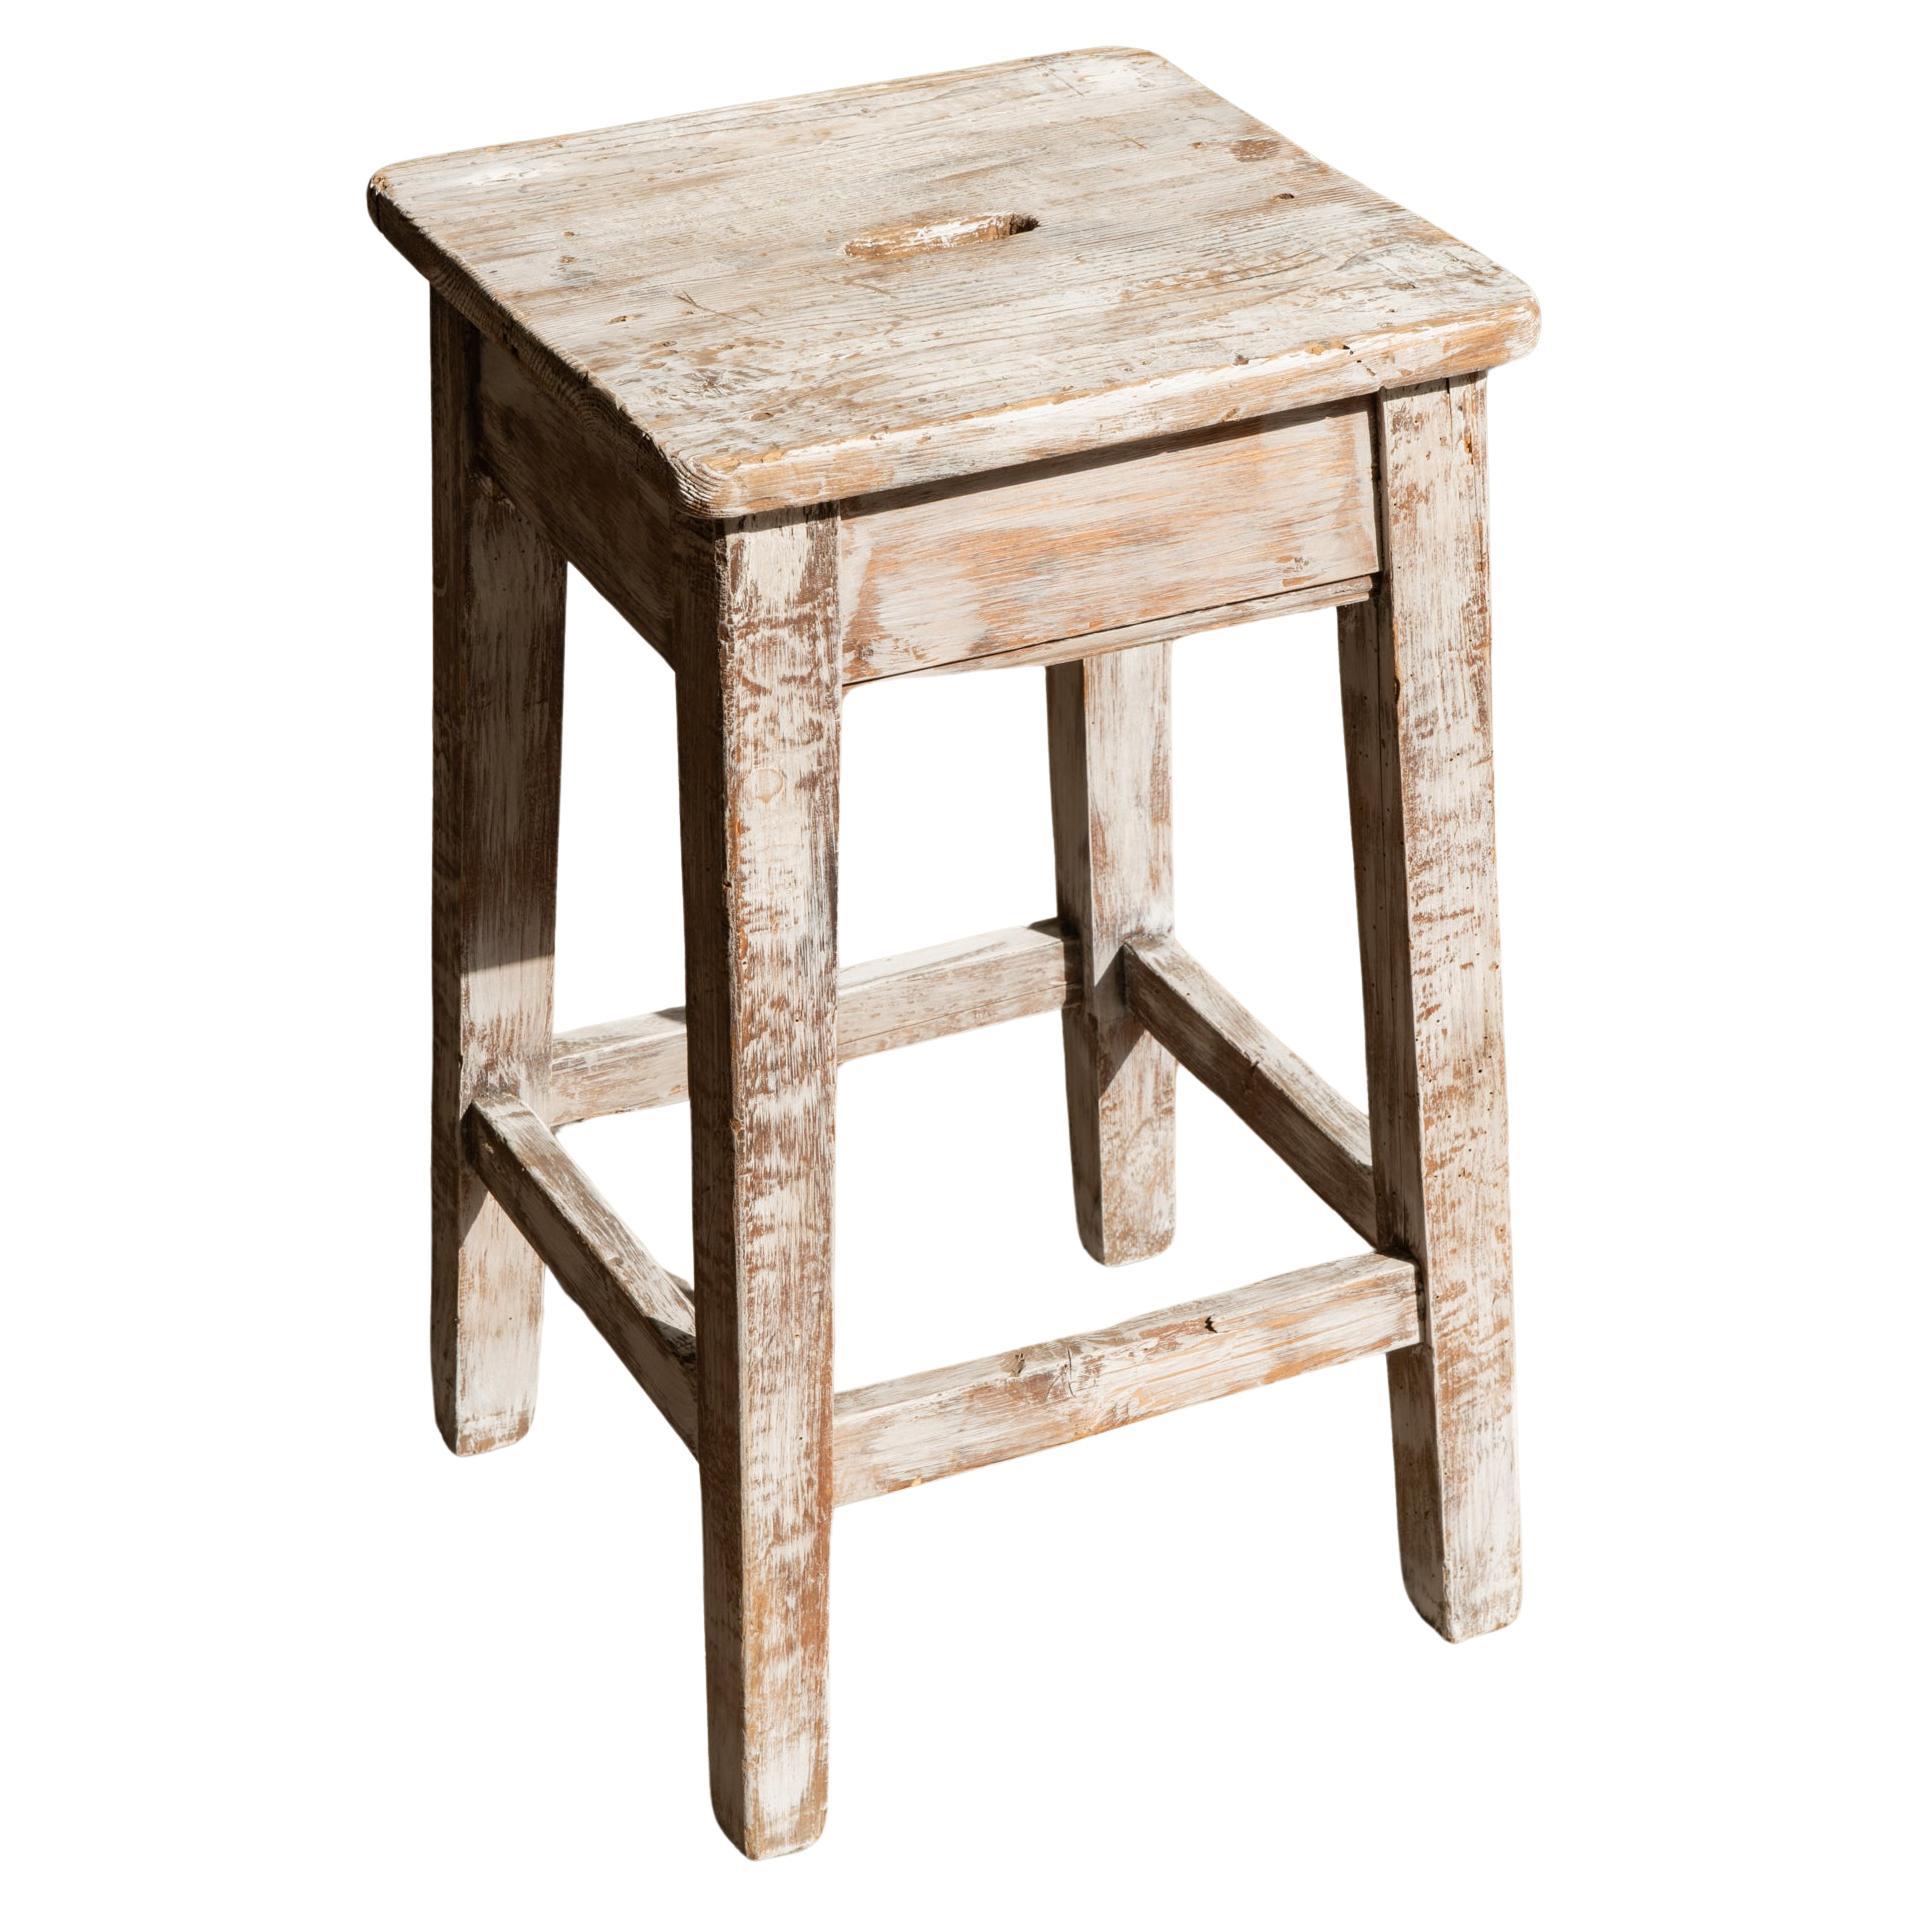 Italian Simple Wooden Stool For Sale